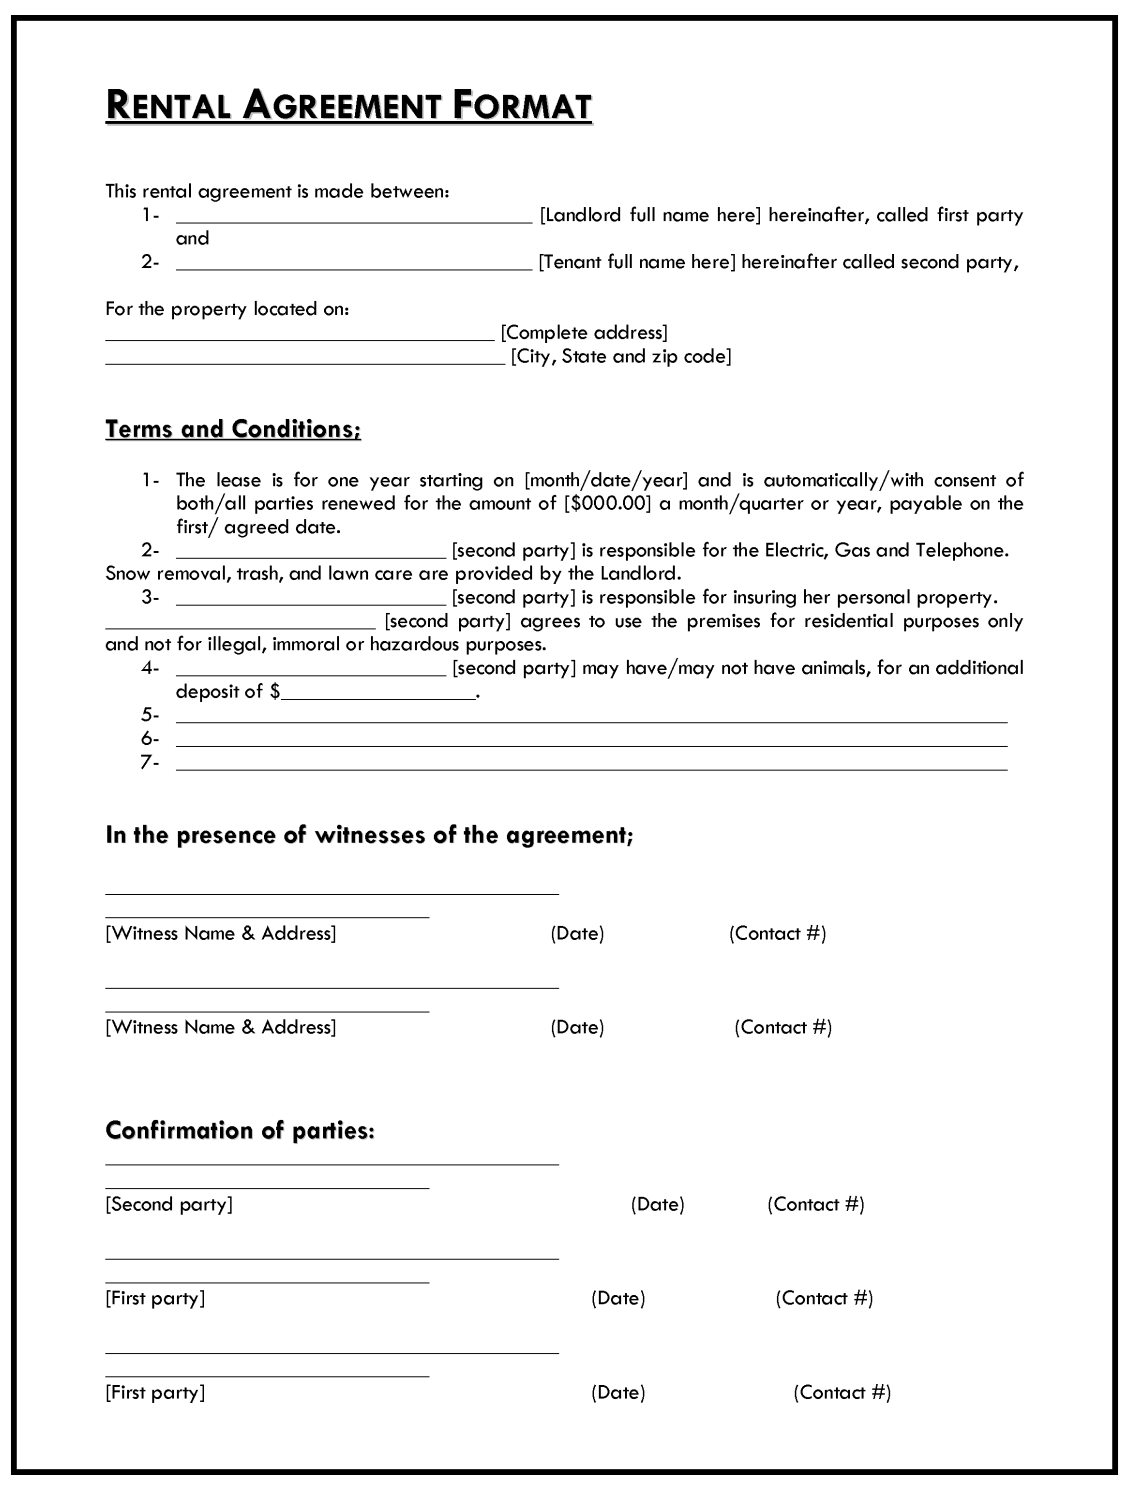 free-indiana-commercial-lease-agreement-template-pdf-word-eforms